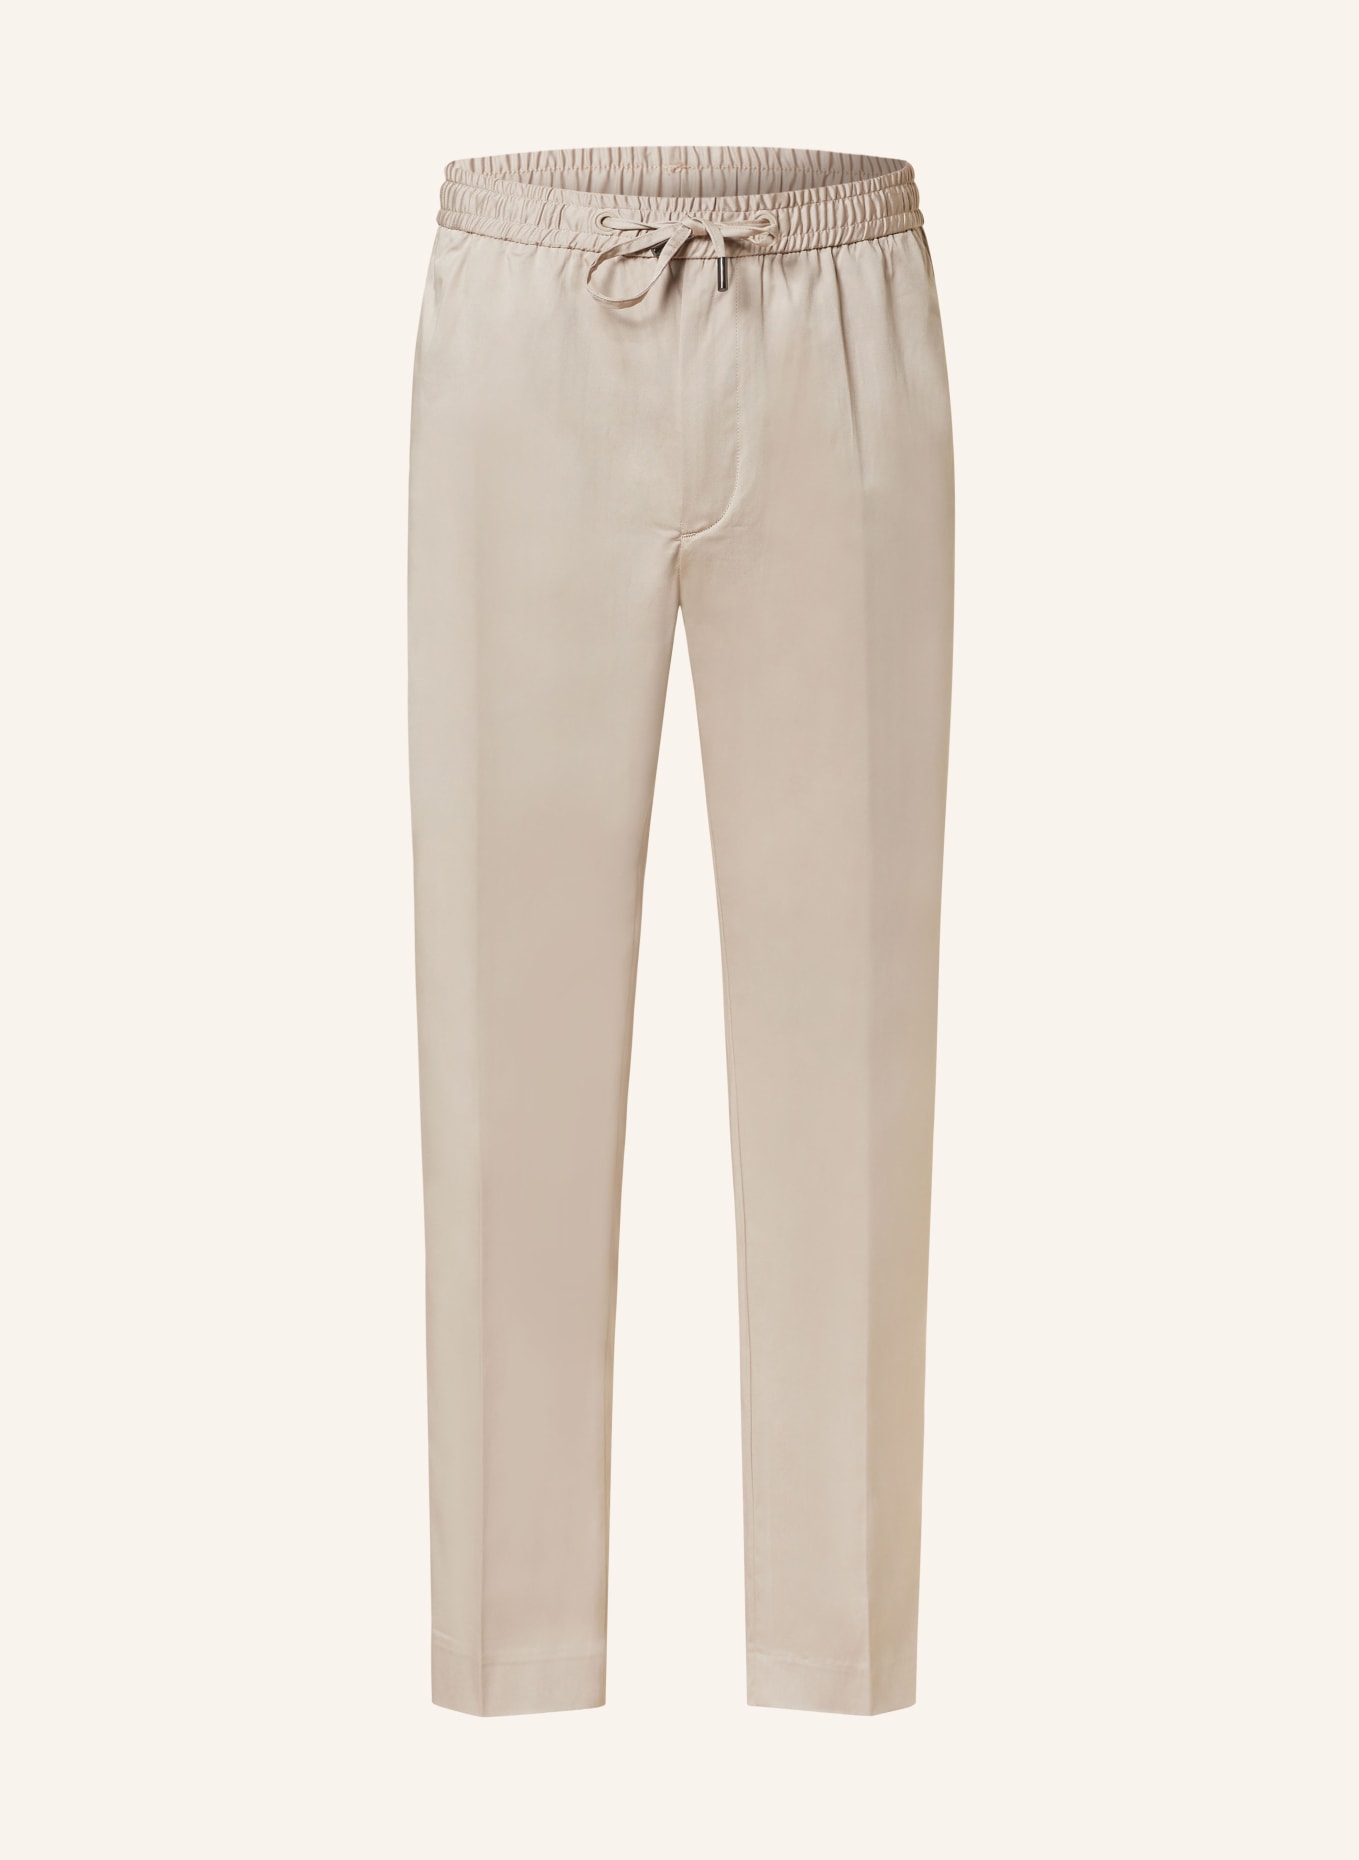 Calvin Klein Pants in jogger style, Color: BEIGE (Image 1)